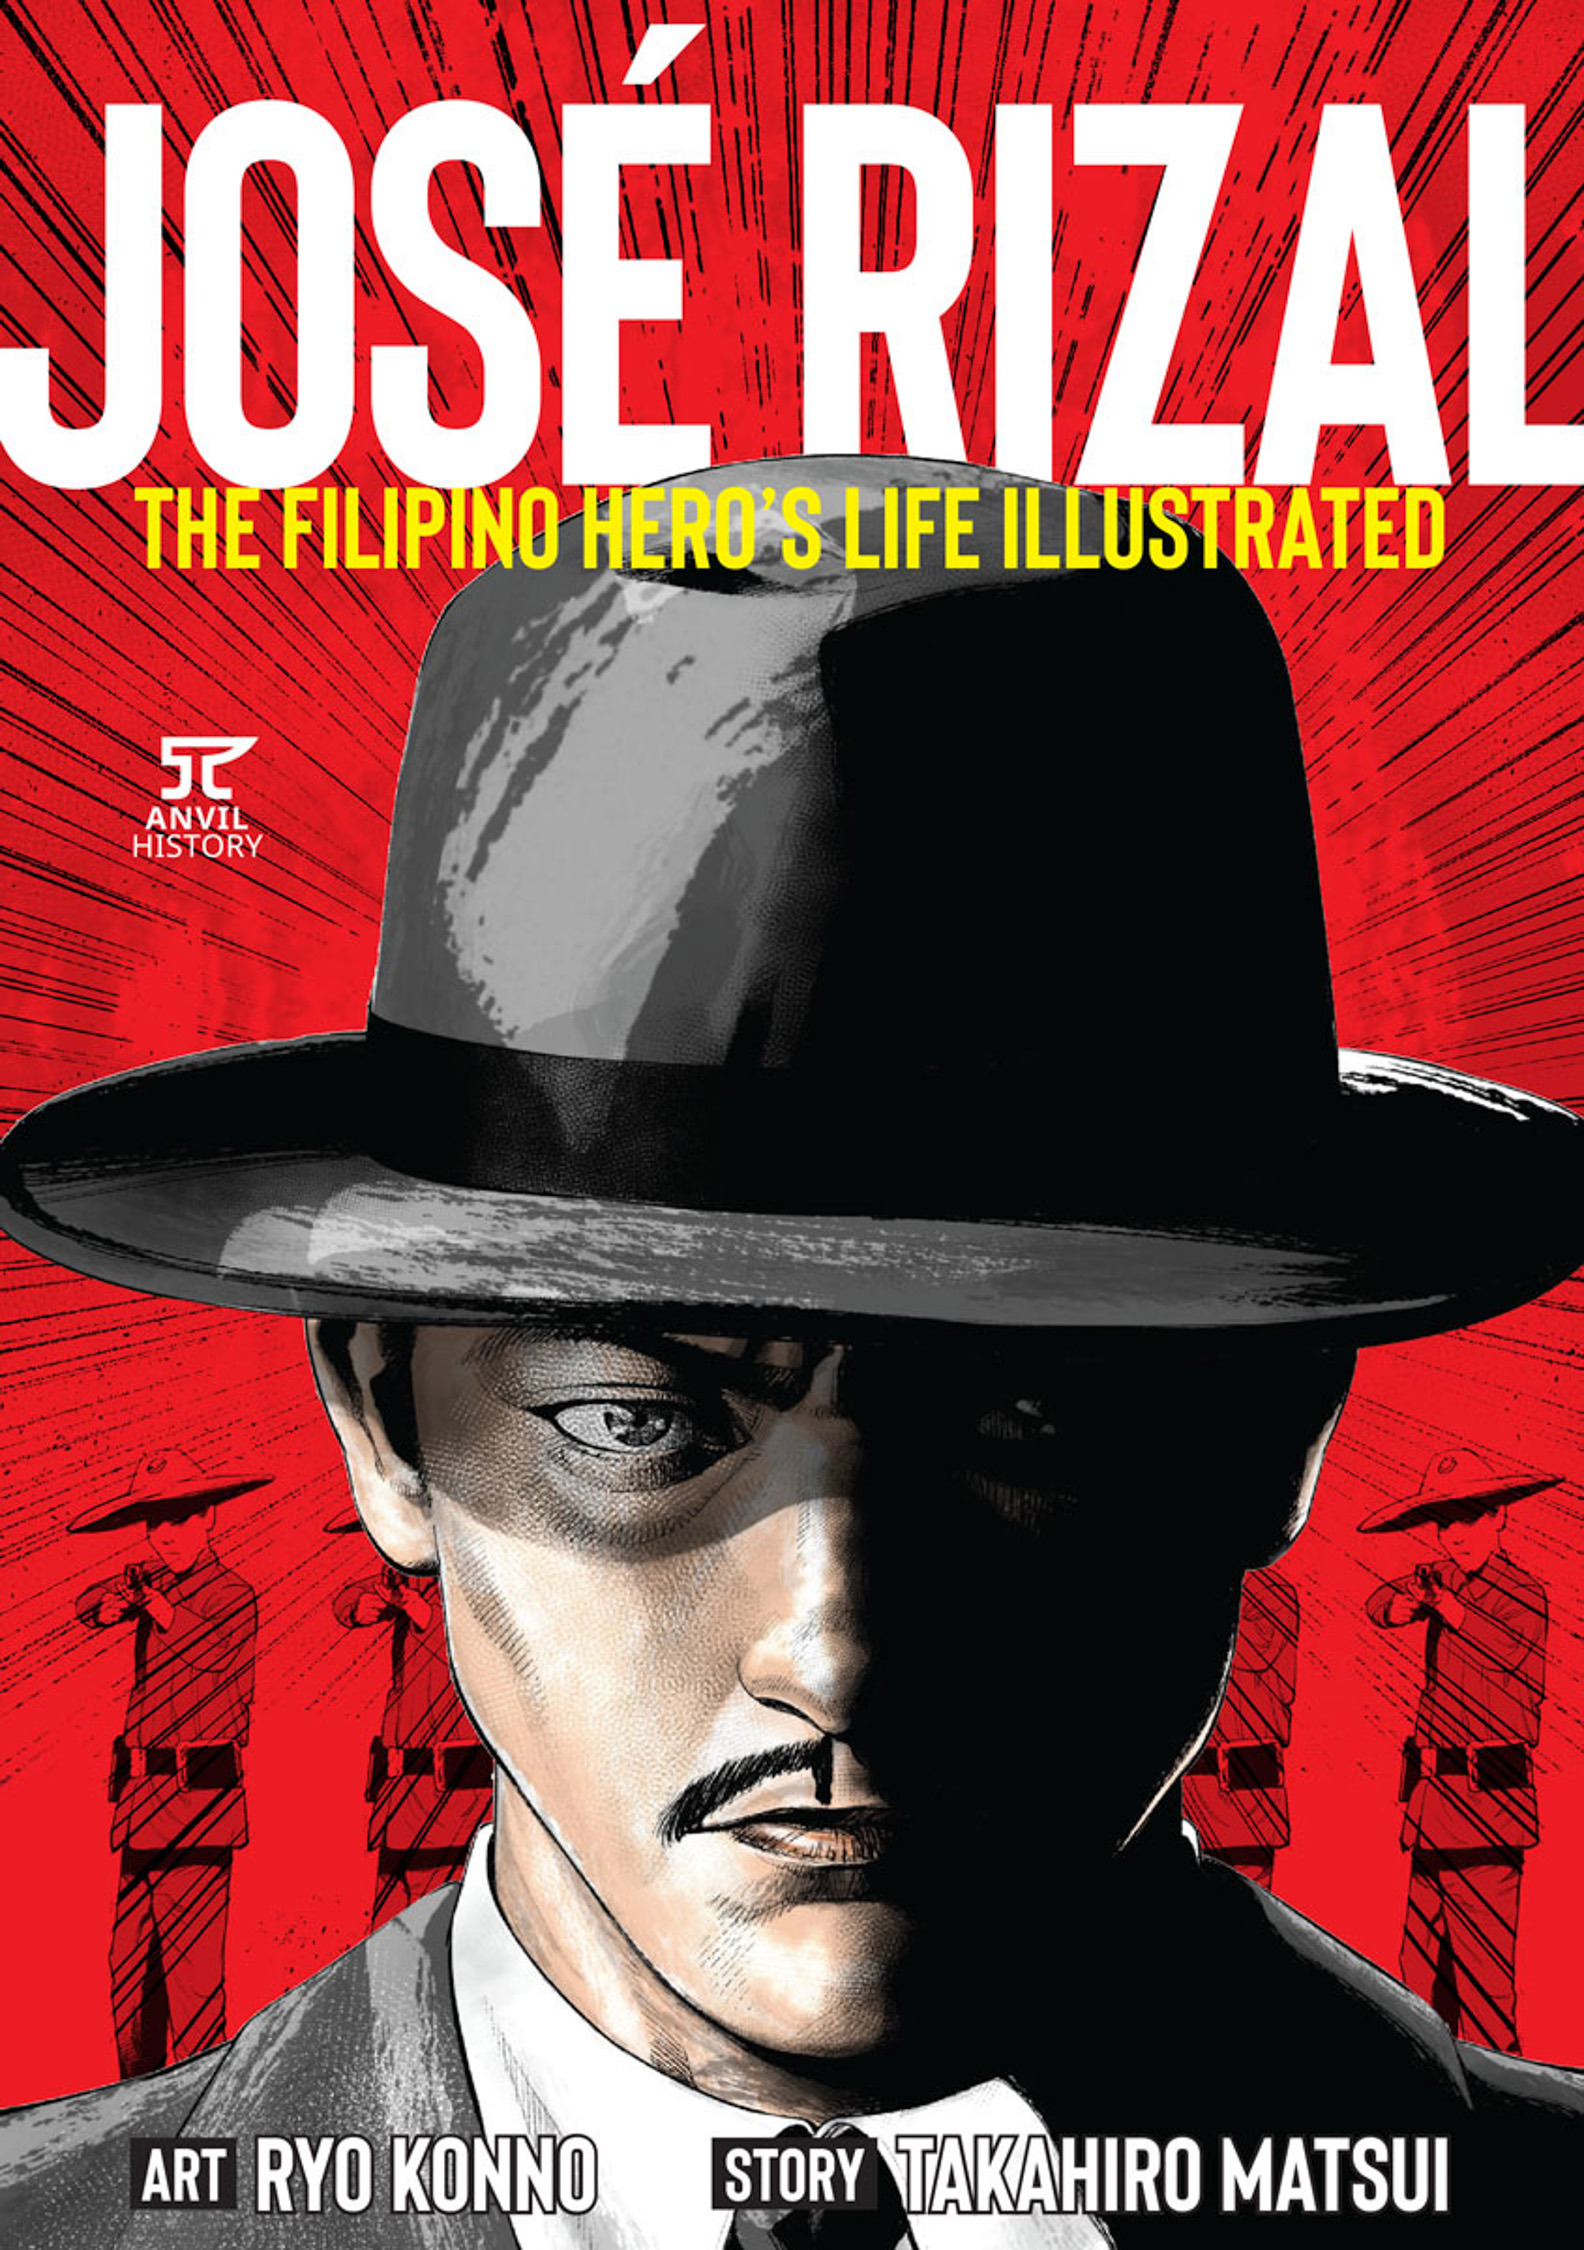 From manga to ‘serye’: Finding the cool, relatable Rizal